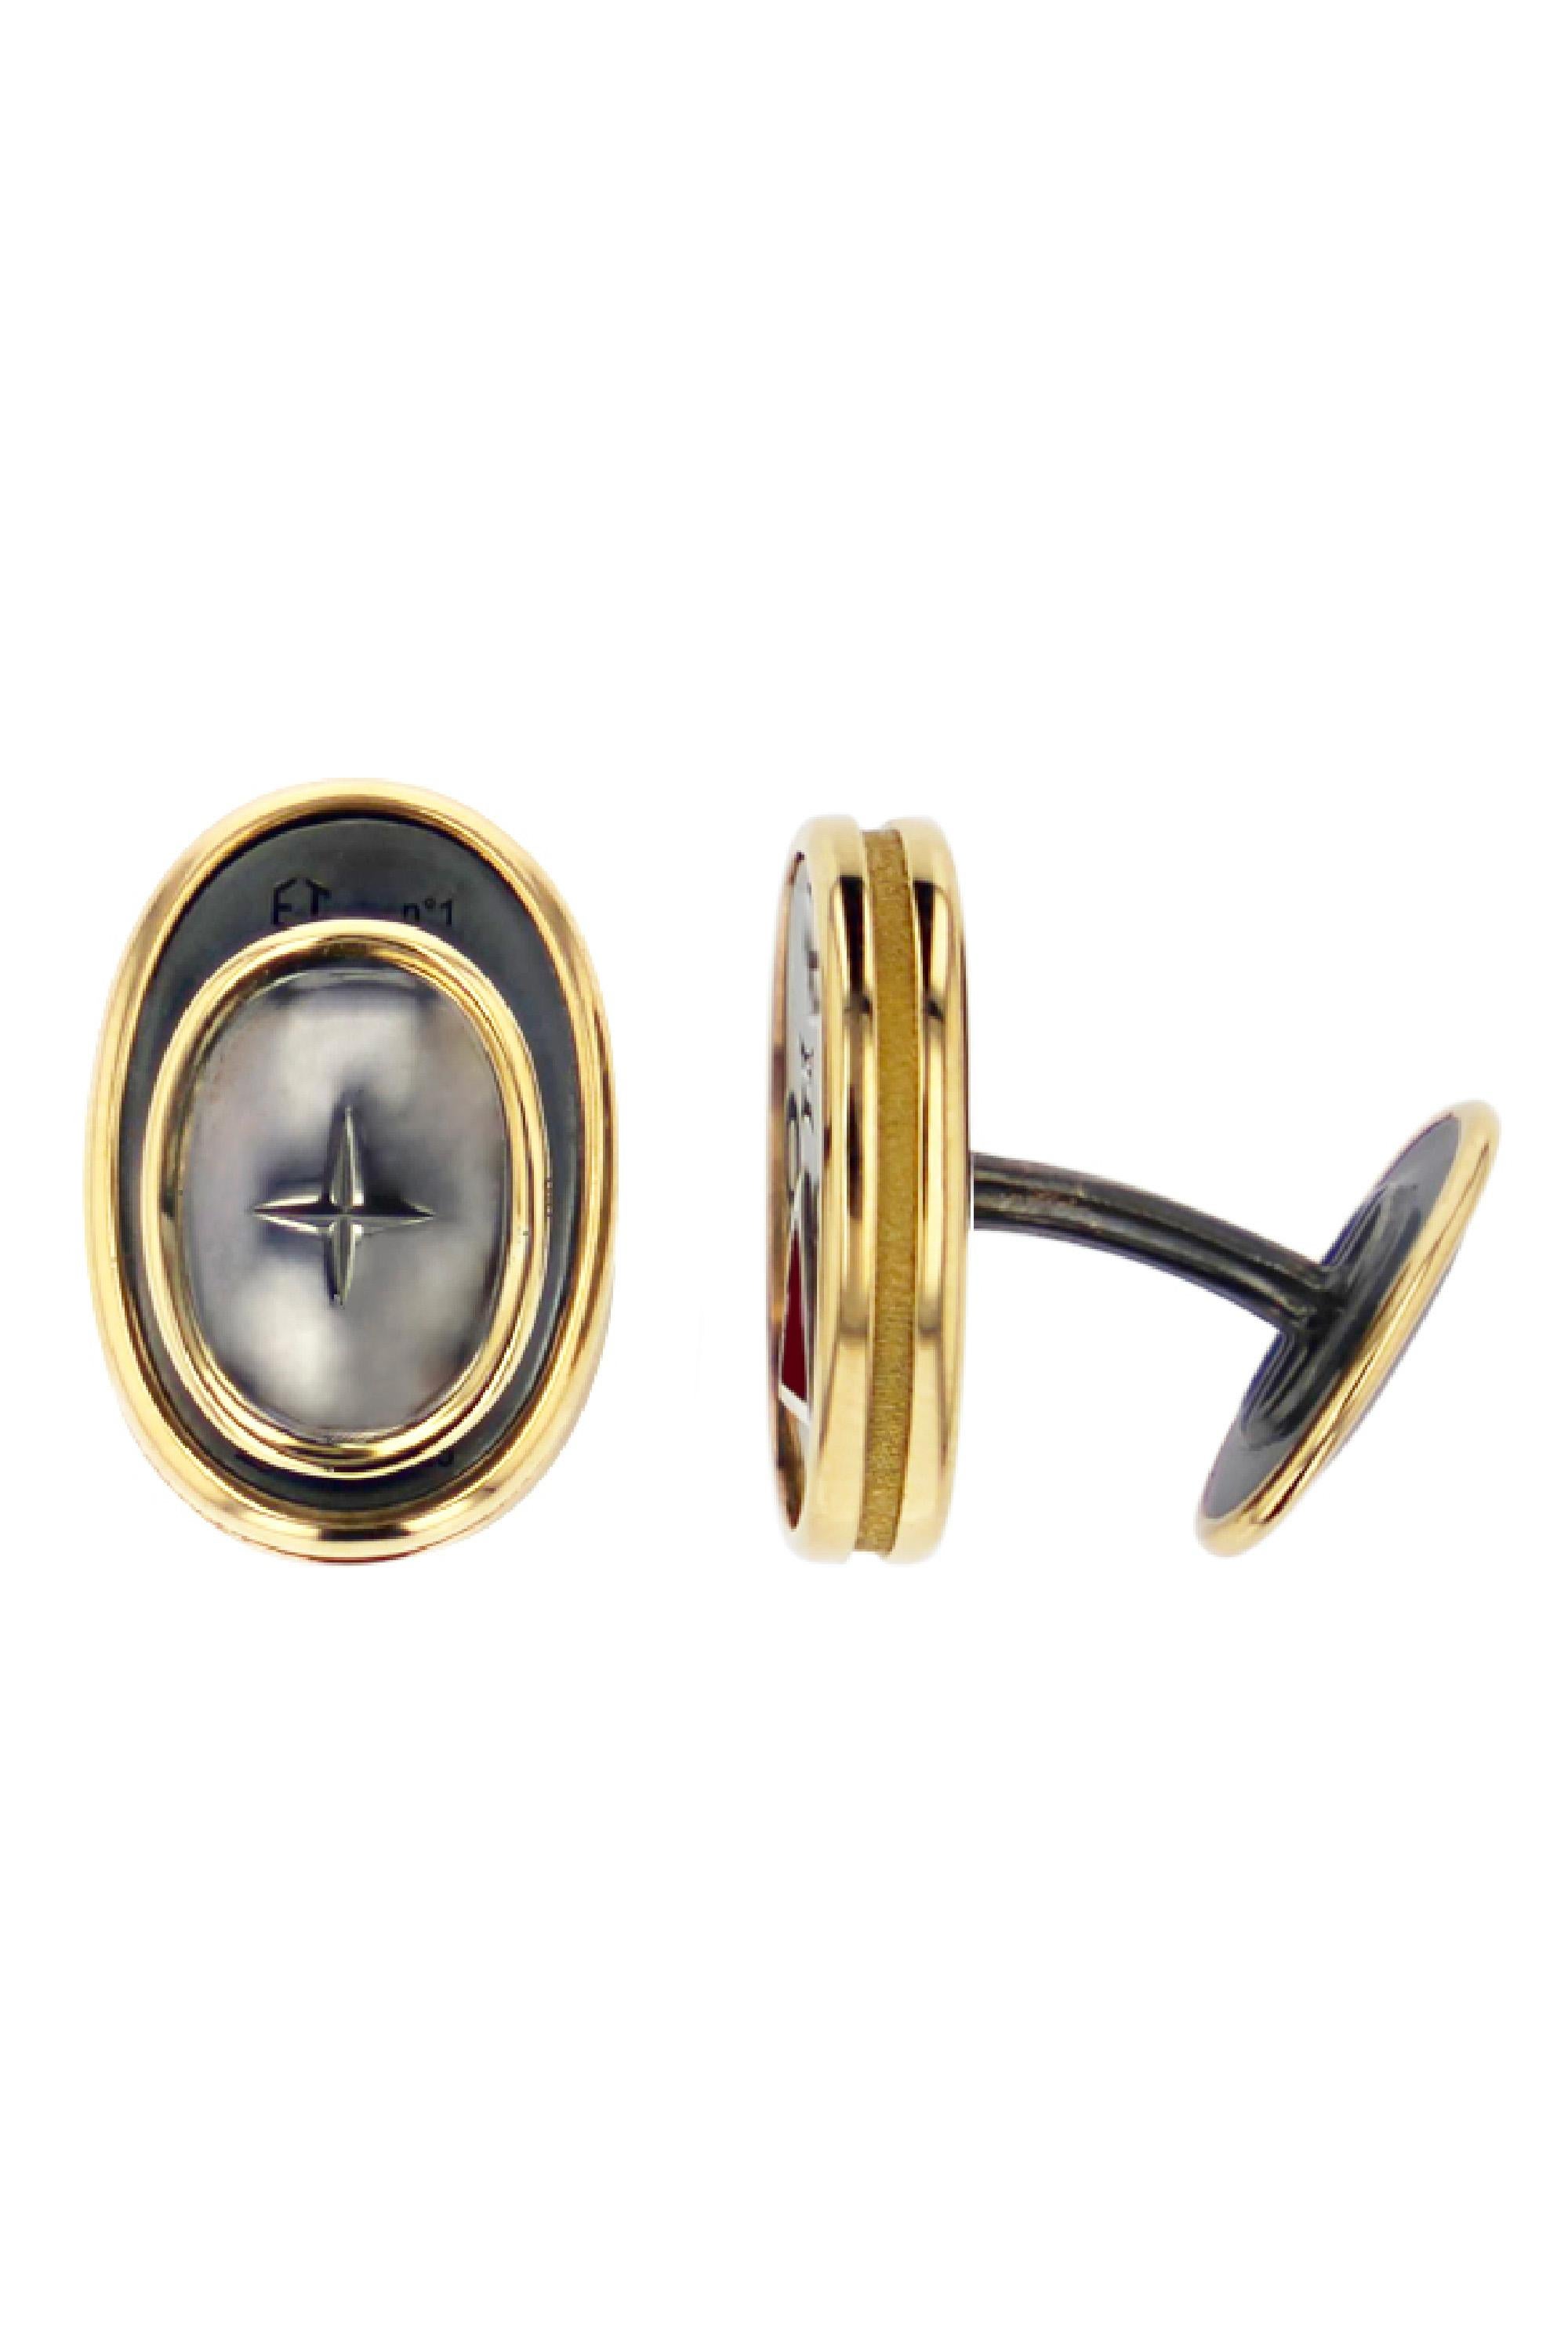 Cufflinks in yellow gold and distressed silver. On one side are engraved the signs of Fire (Sagittarius, Leo, Aries) and on the other, a salamander on a carnelian background.

Details:
Carnelian
Diamond: 0.015 cts
18k Yellow Gold: 6.7 g
Distressed